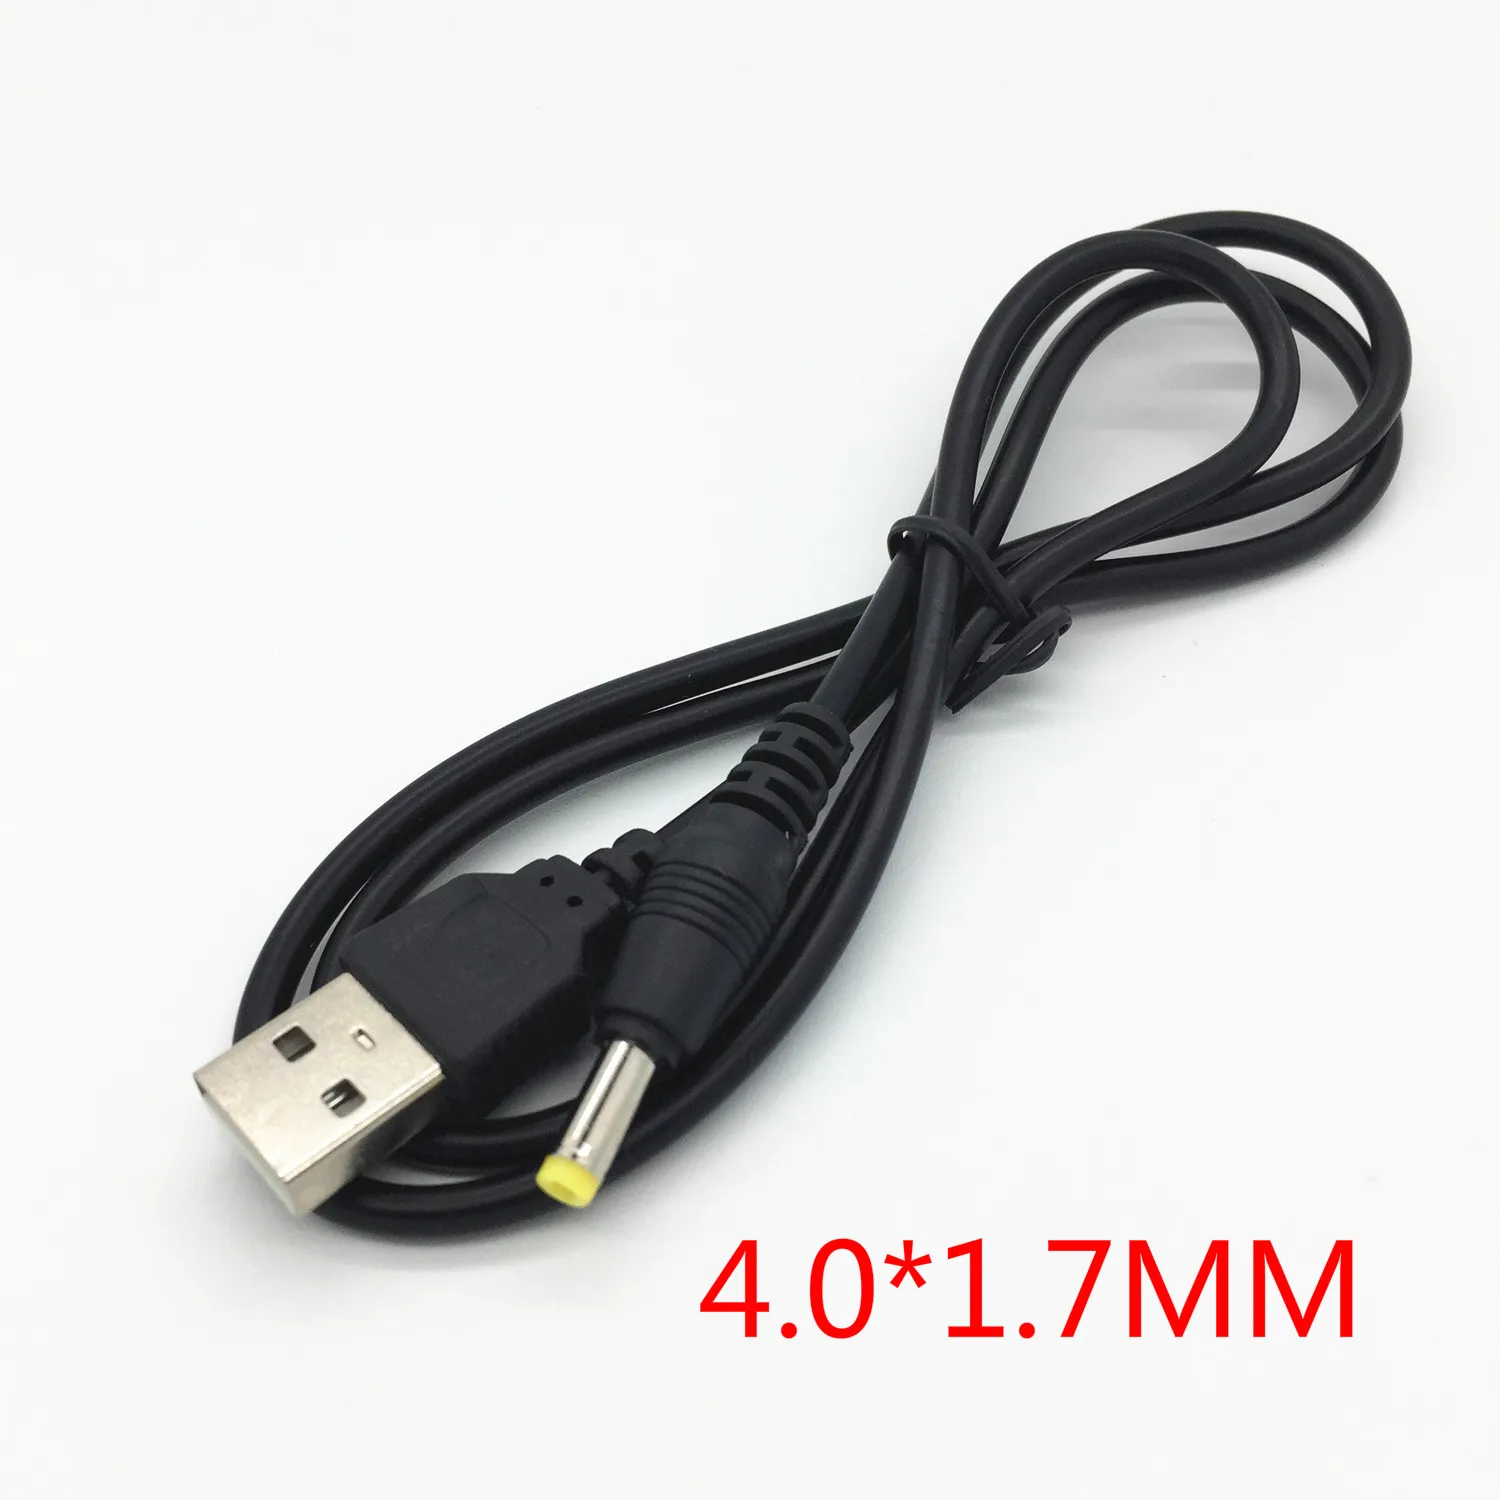 SLLEA USB-A to DC 5v 4.0mm/1.7mm power adapter cable lead 80cm charger for Sony-PSP 